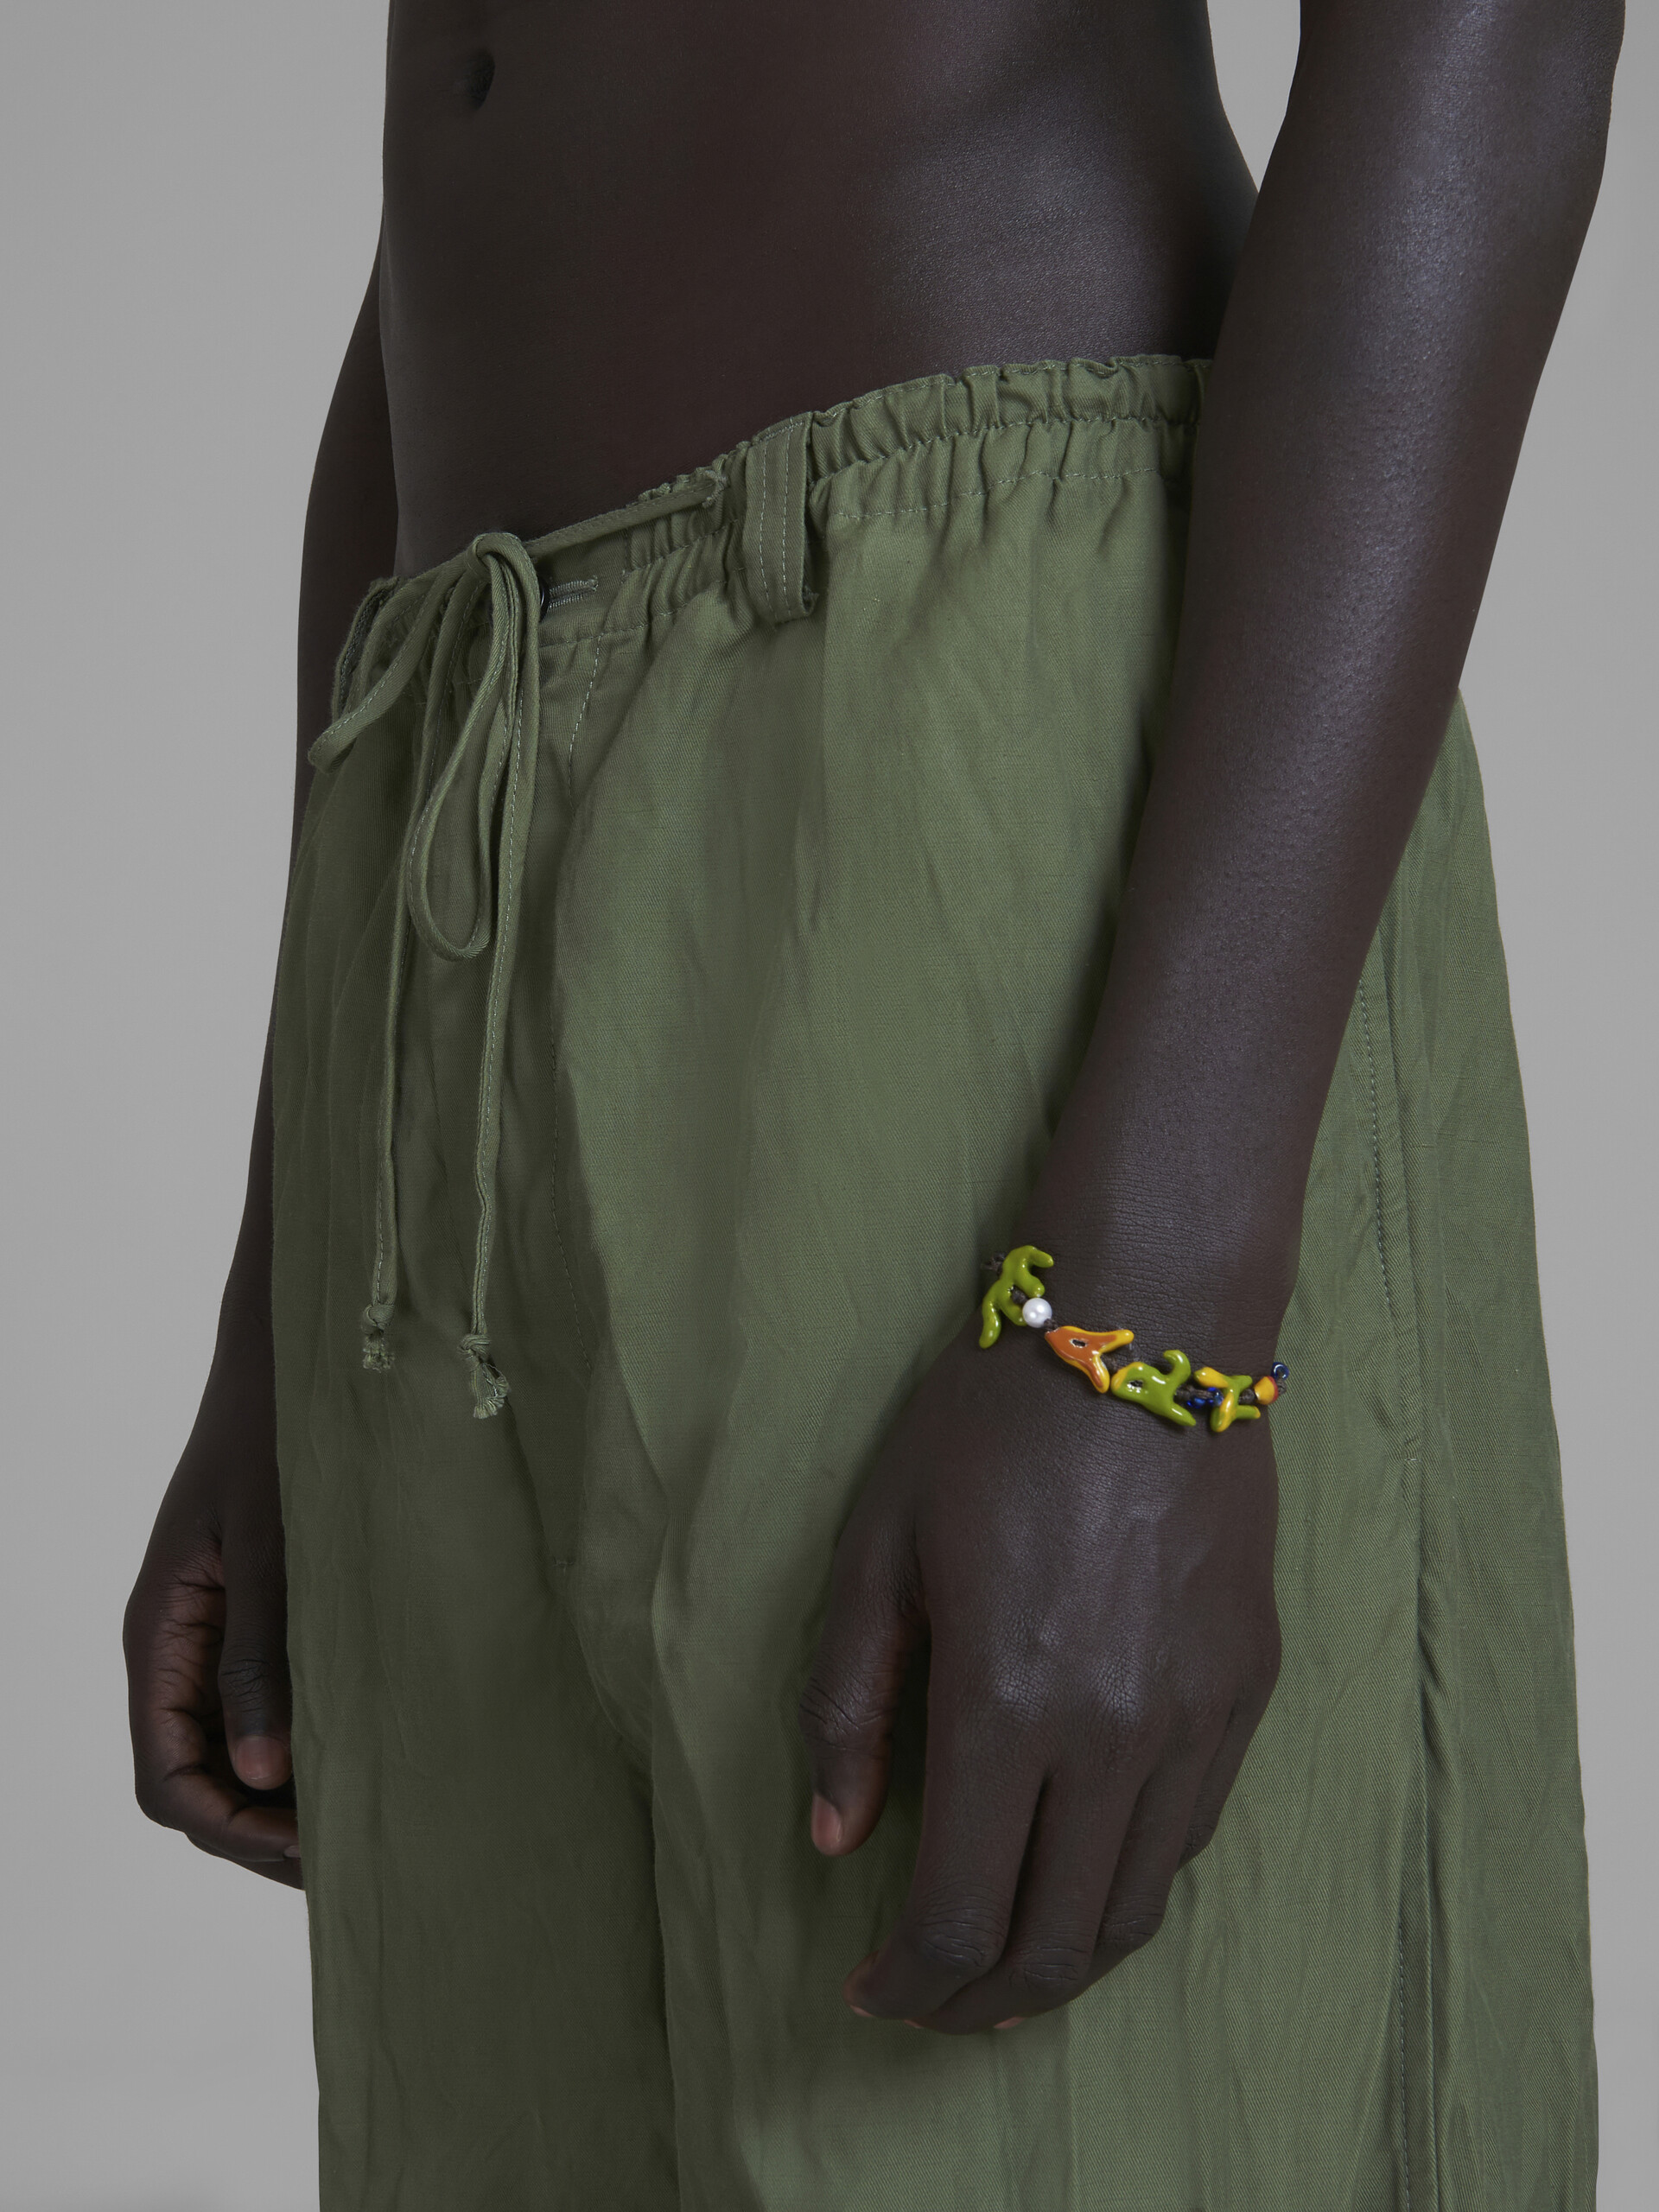 Marni x No Vacancy Inn - Bracelet with green red and yellow pendants - Bracelets - Image 5